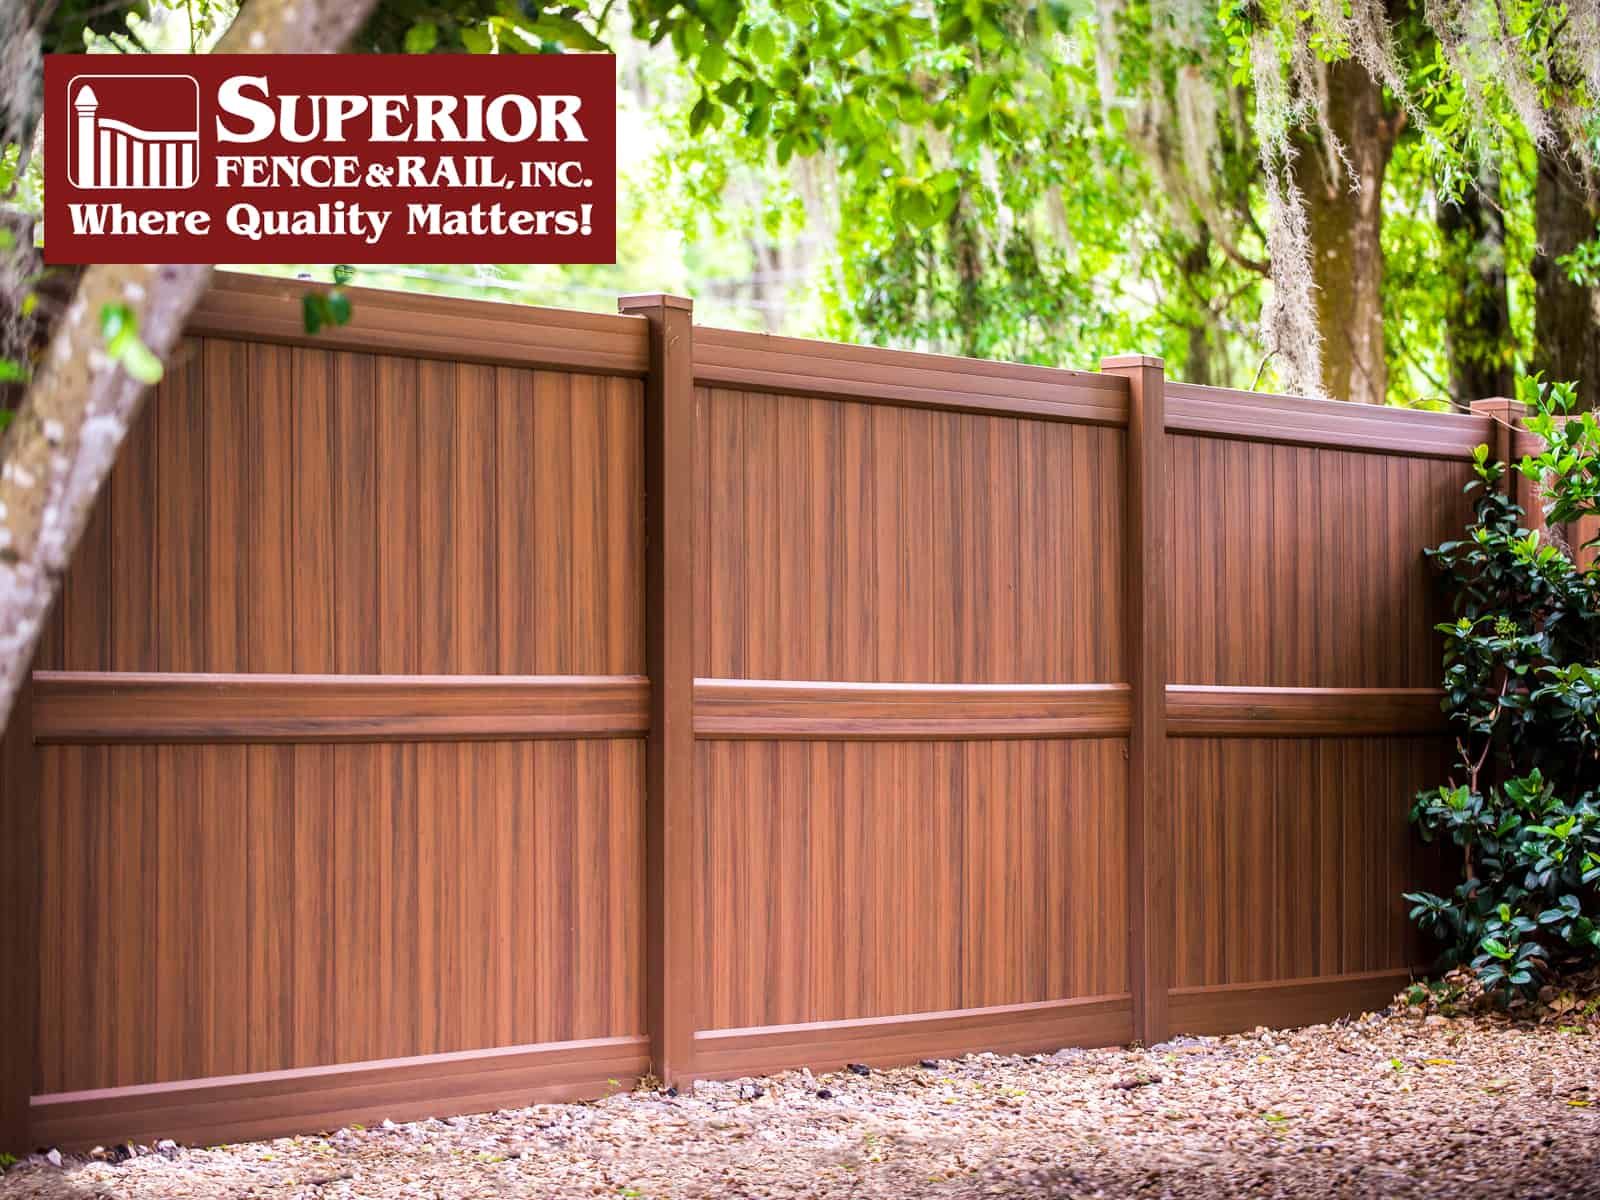 Simi Valley Fence Company Contractor